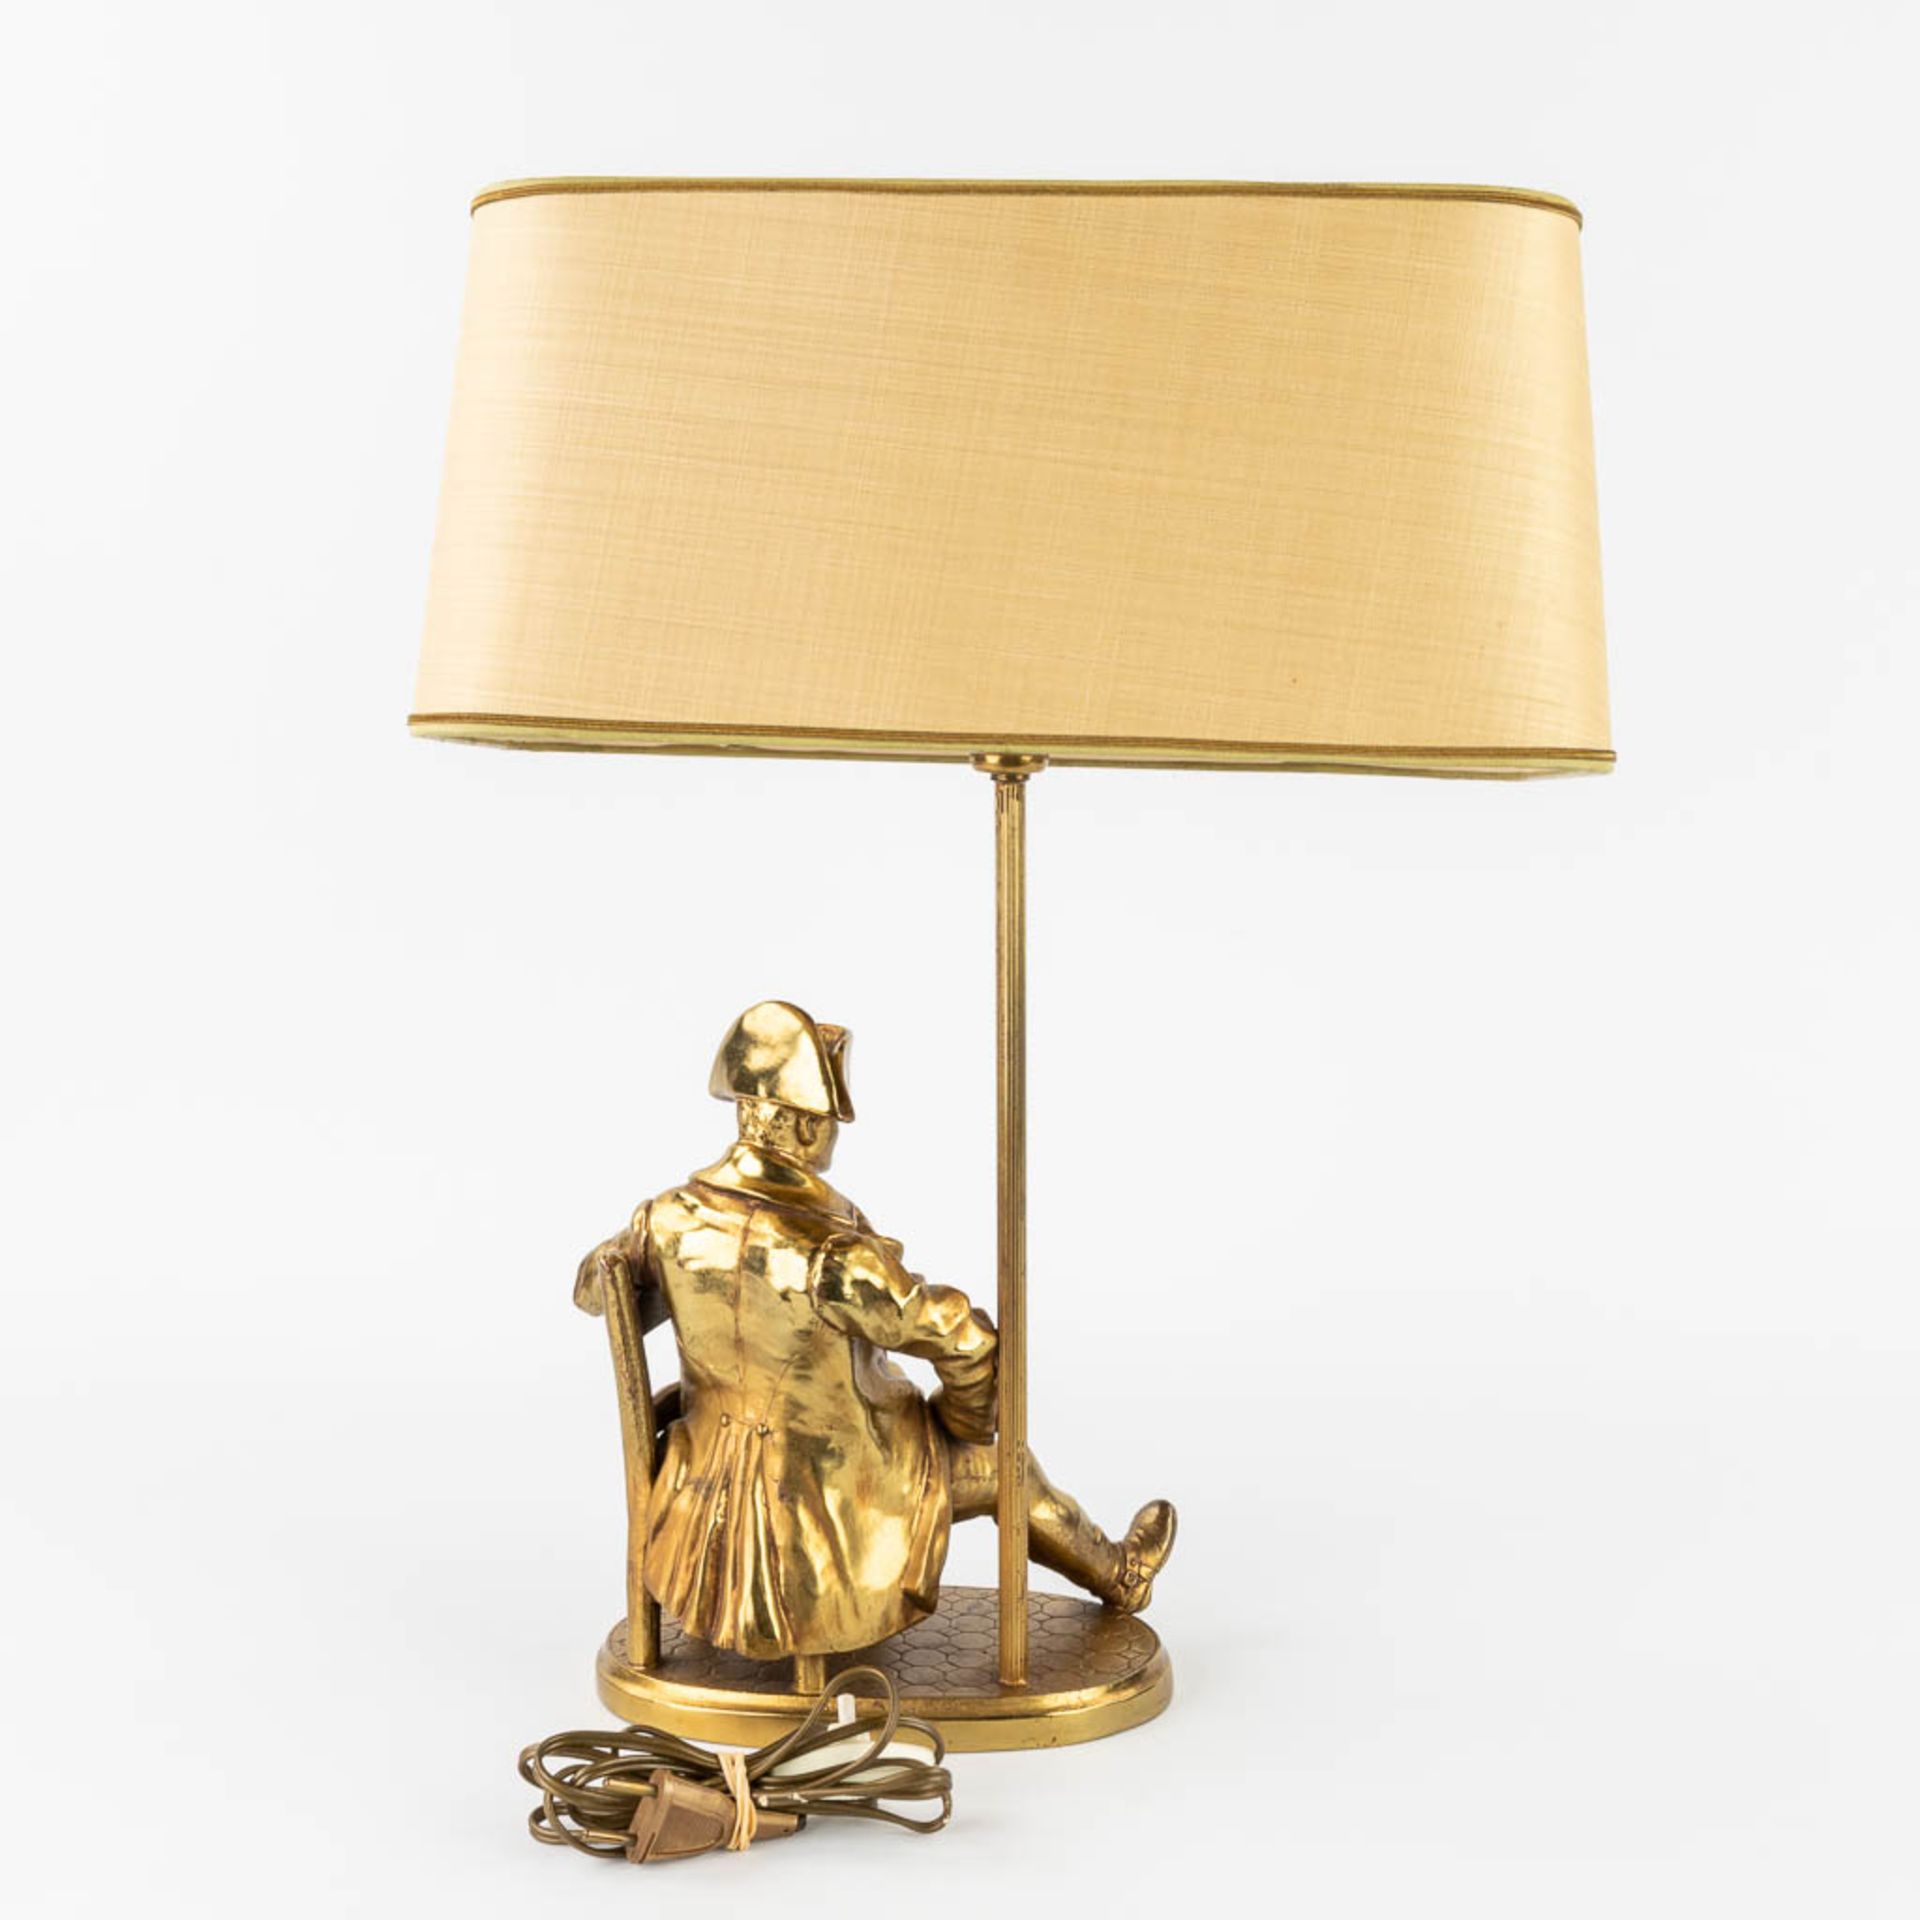 A collection of 2 table lamps with statues of Napoleon Bonaparte. (H:38 cm) - Image 14 of 18